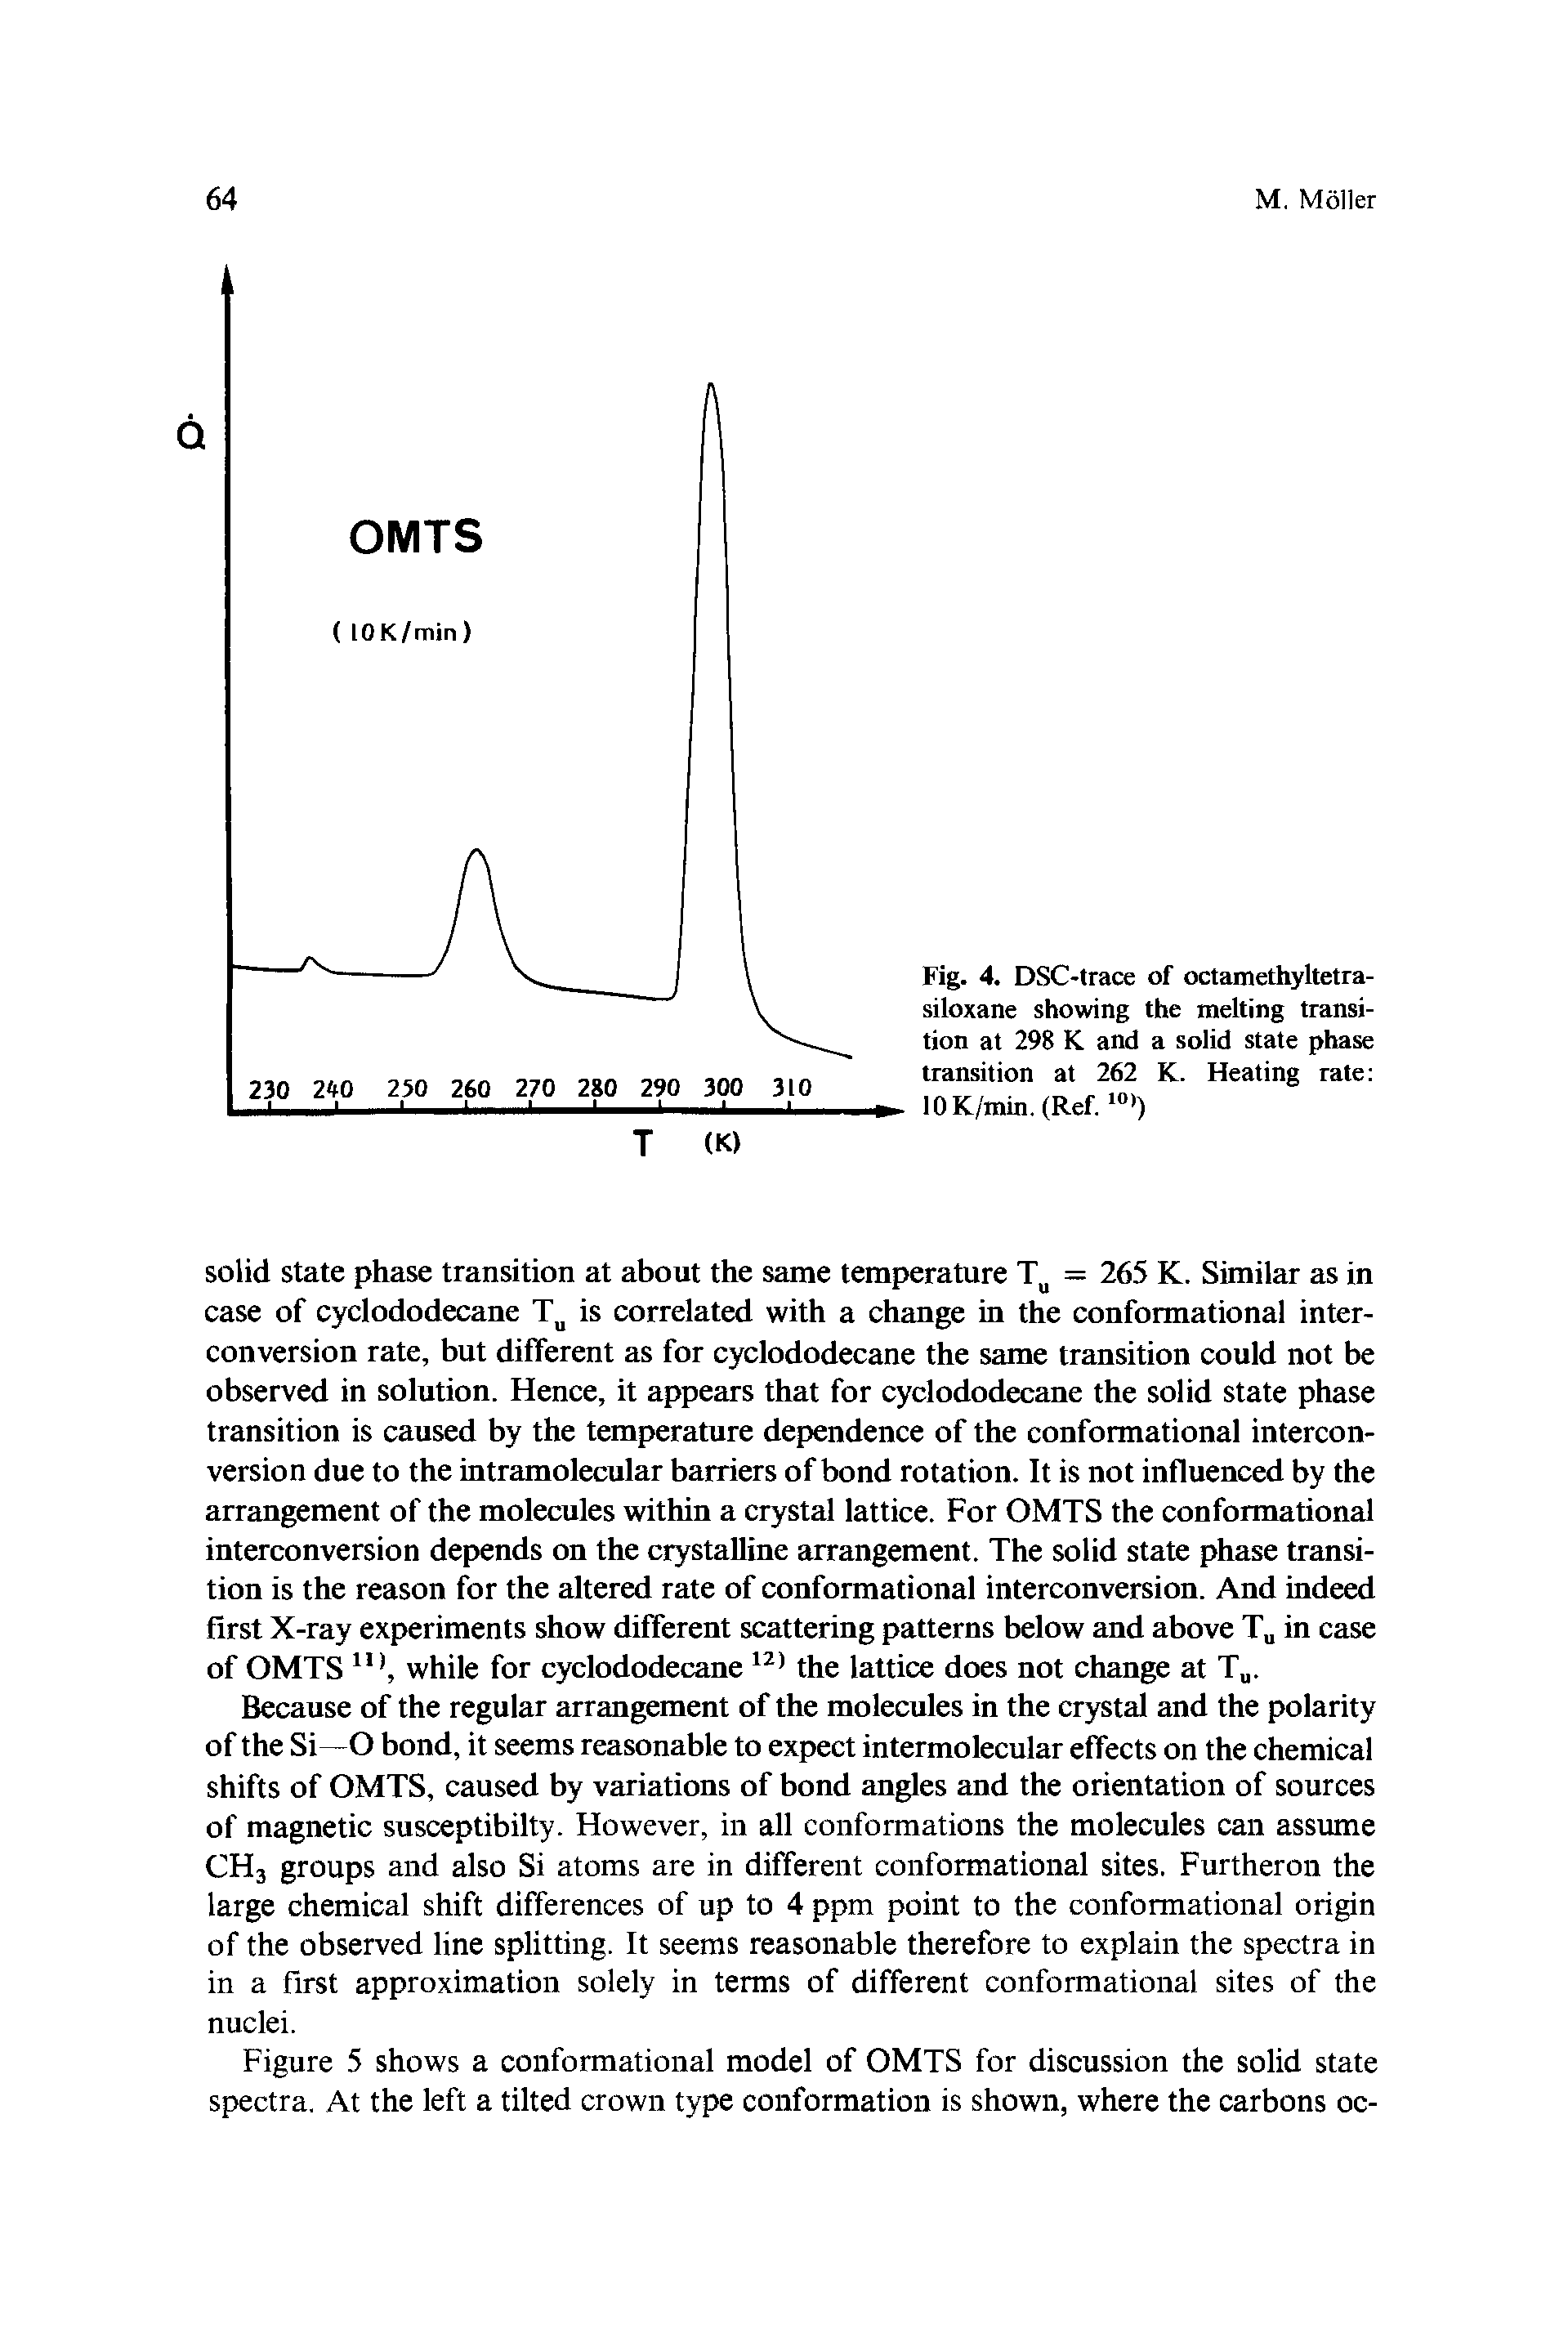 Fig. 4. DSC-trace of octamethyltetra-siloxane showing the melting transition at 298 K and a solid state phase transition at 262 K. Heating rate lOK/ min. (Ref. 10))...